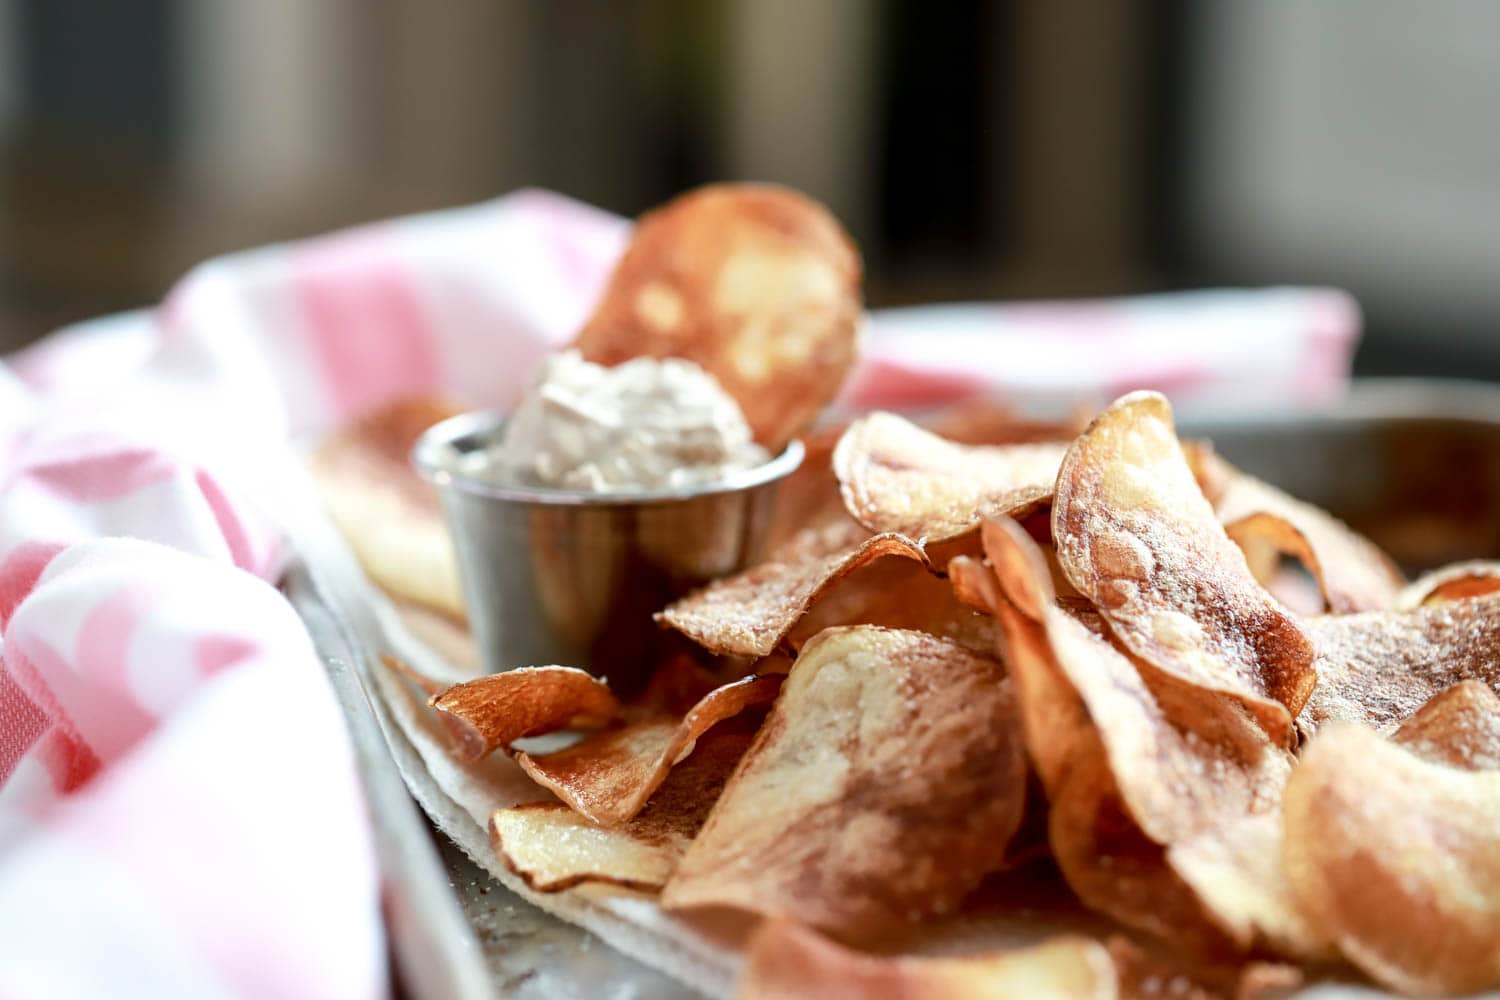 pan fried potato chips pile with french onion dip in the background.